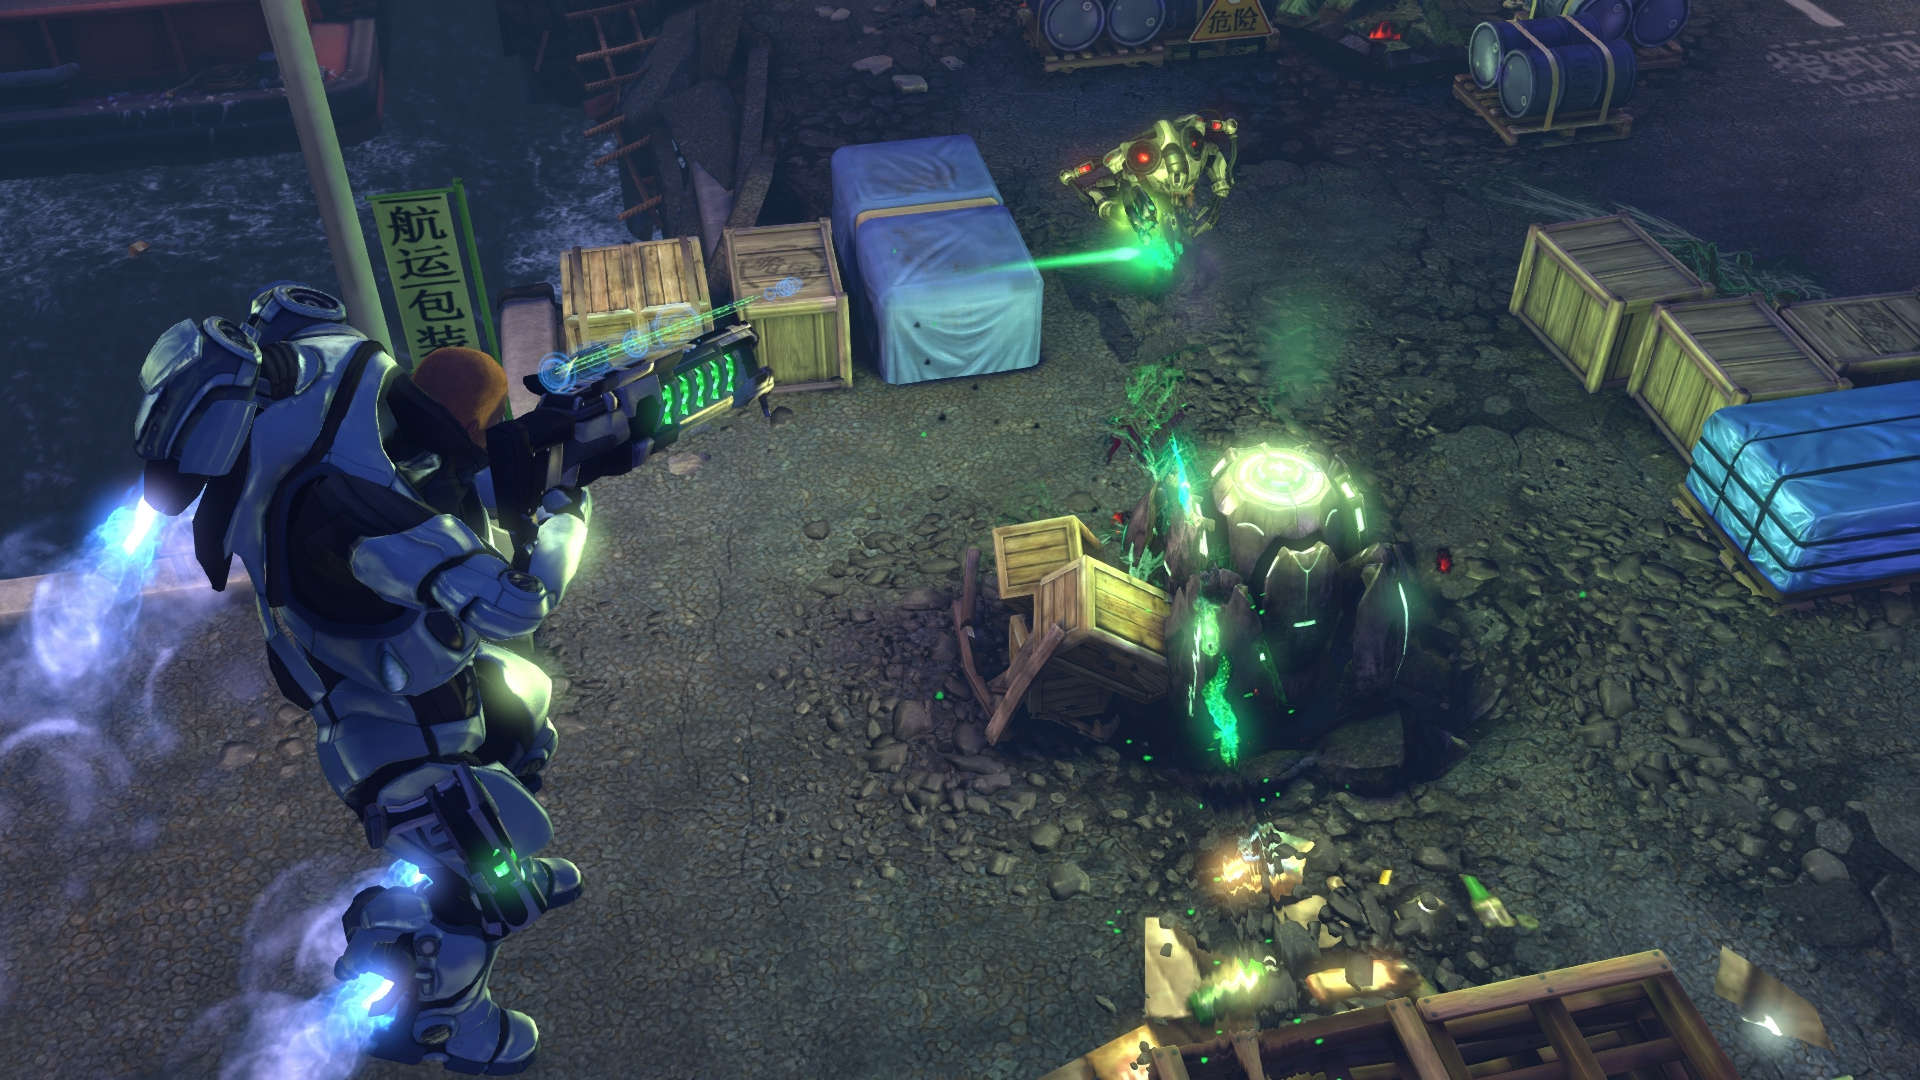 Amazing XCOM: Enemy Unknown Pictures & Backgrounds